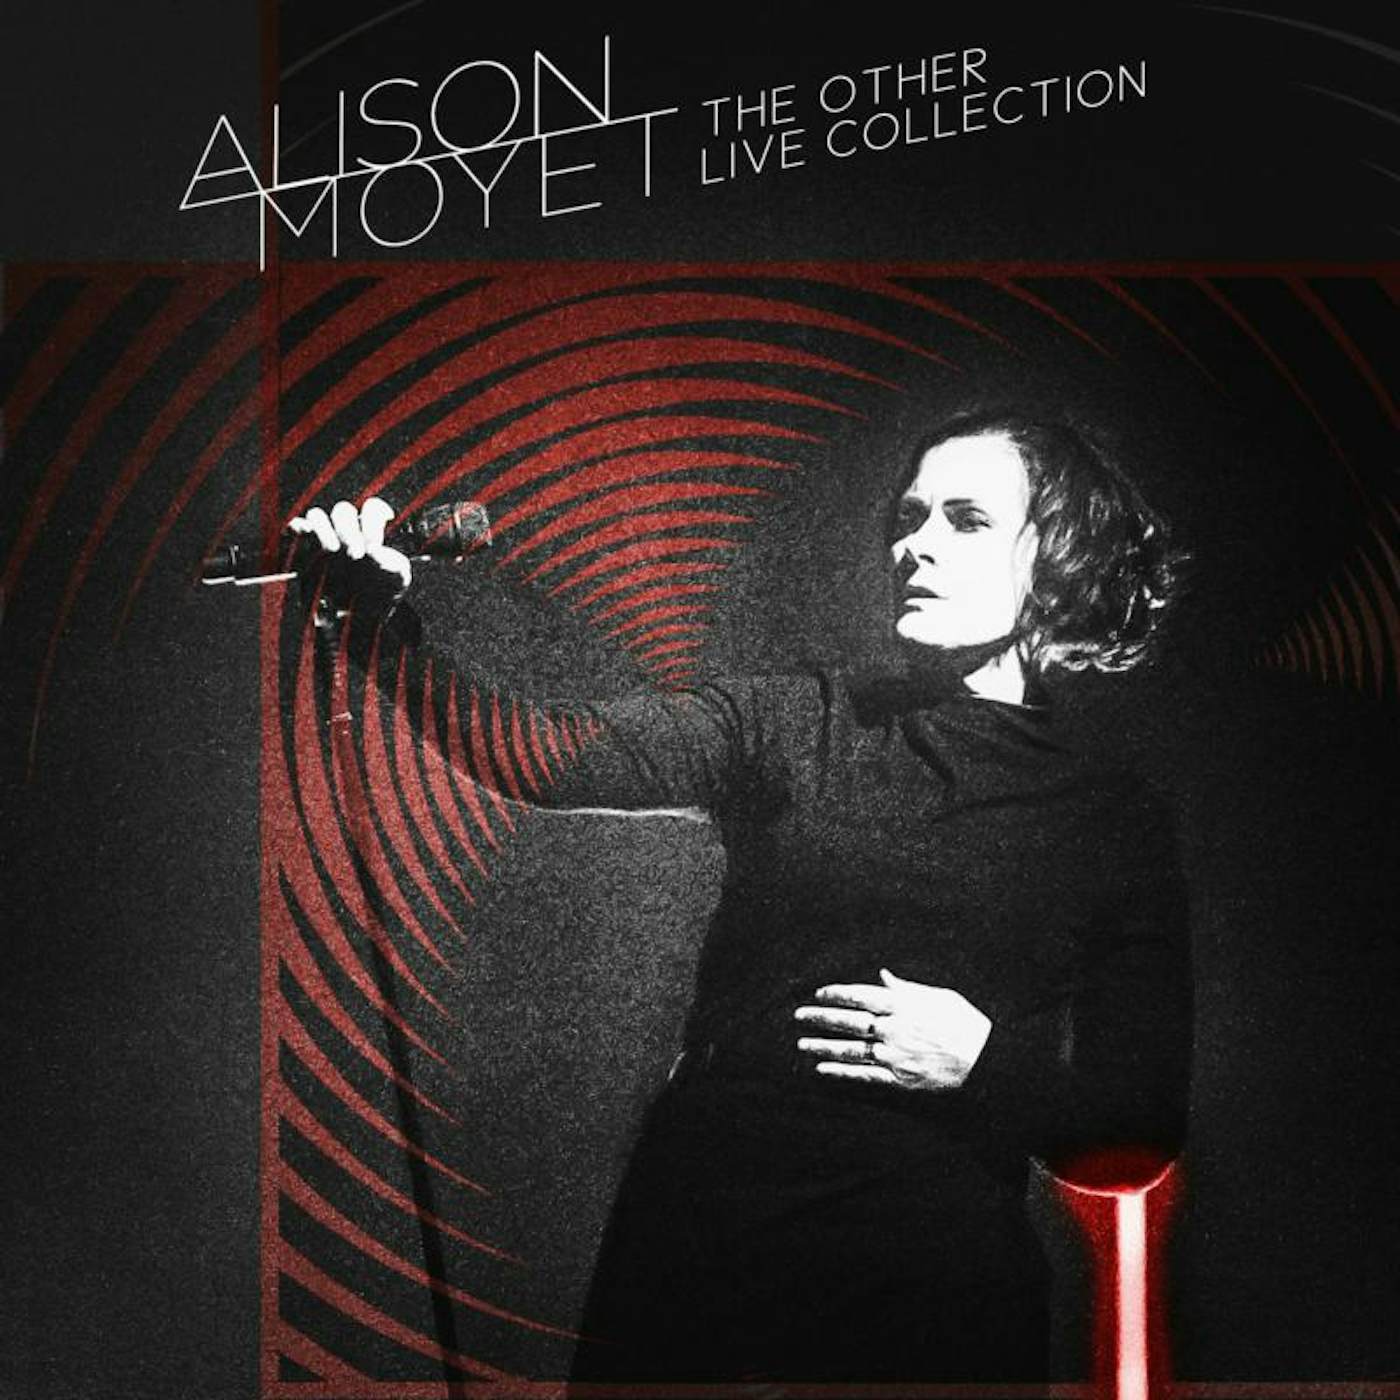  Alison Moyet LP - Other Live Collection The (Vinyl)